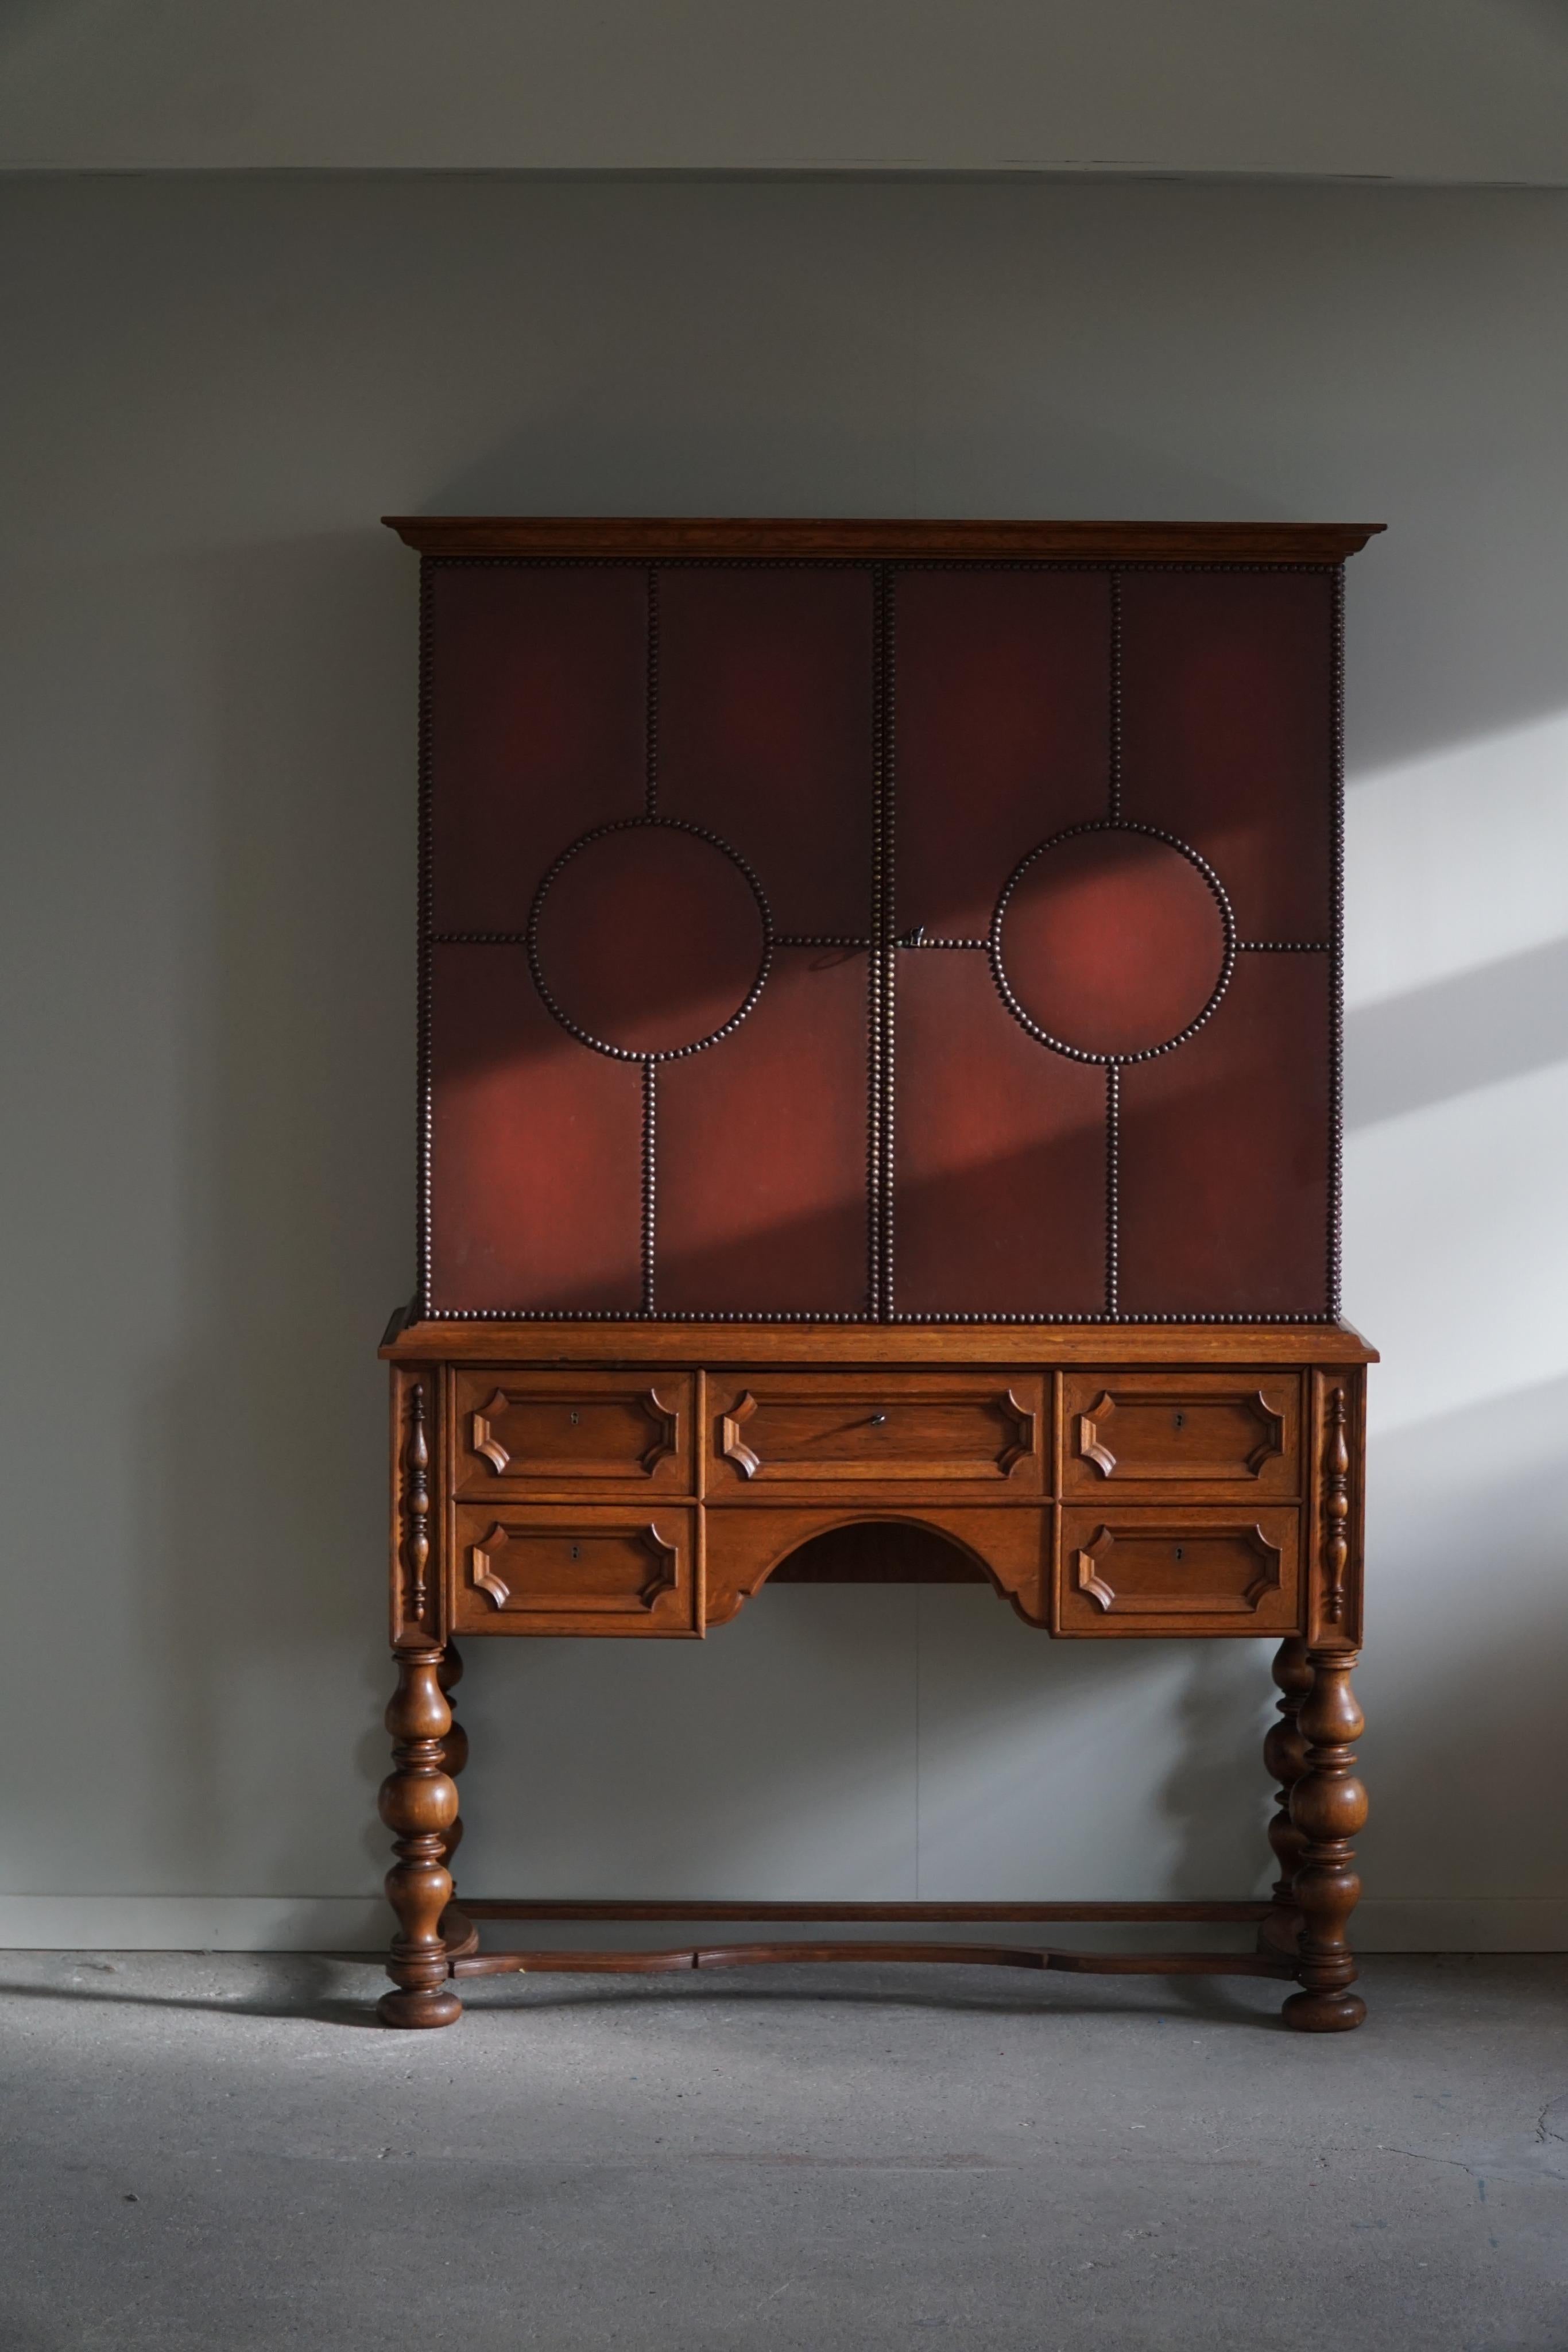 An exclusive cabinet attributed to the famous German born furniture designer Otto Schulz for Boet in Göteborg, Sweden. 
The front is covered in leather with brass nails, drawers and twisted legs made in solid oak. Inside you will find a nice pattern